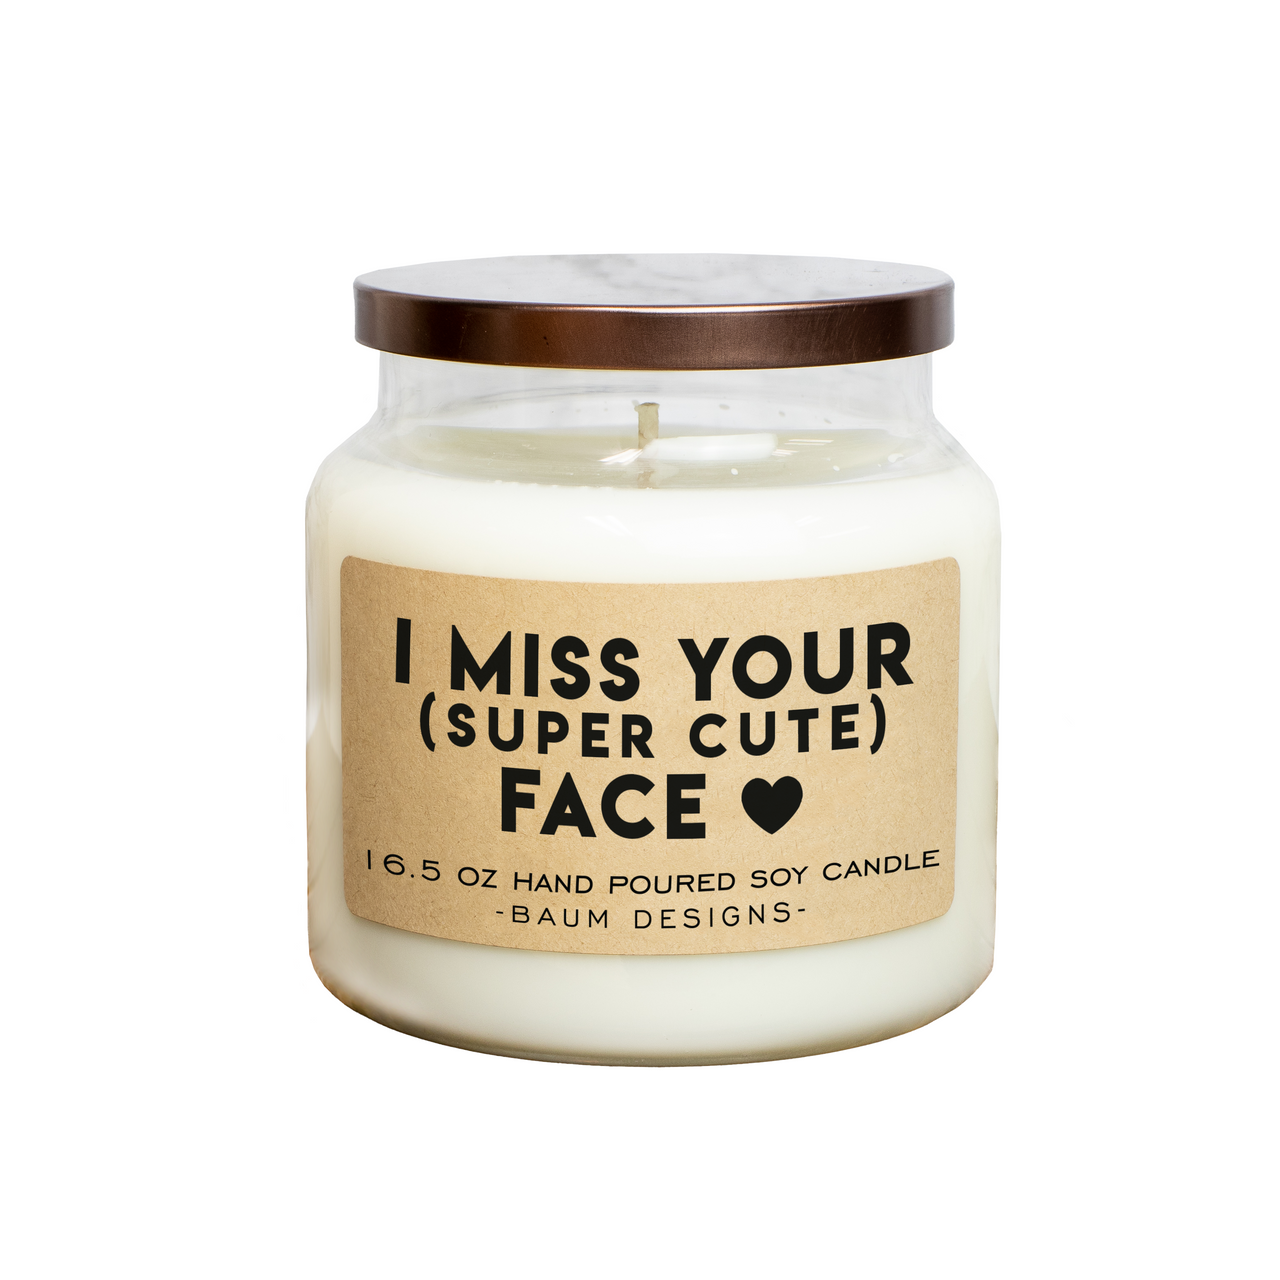 I Miss Your Super Cute Face Soy Candle